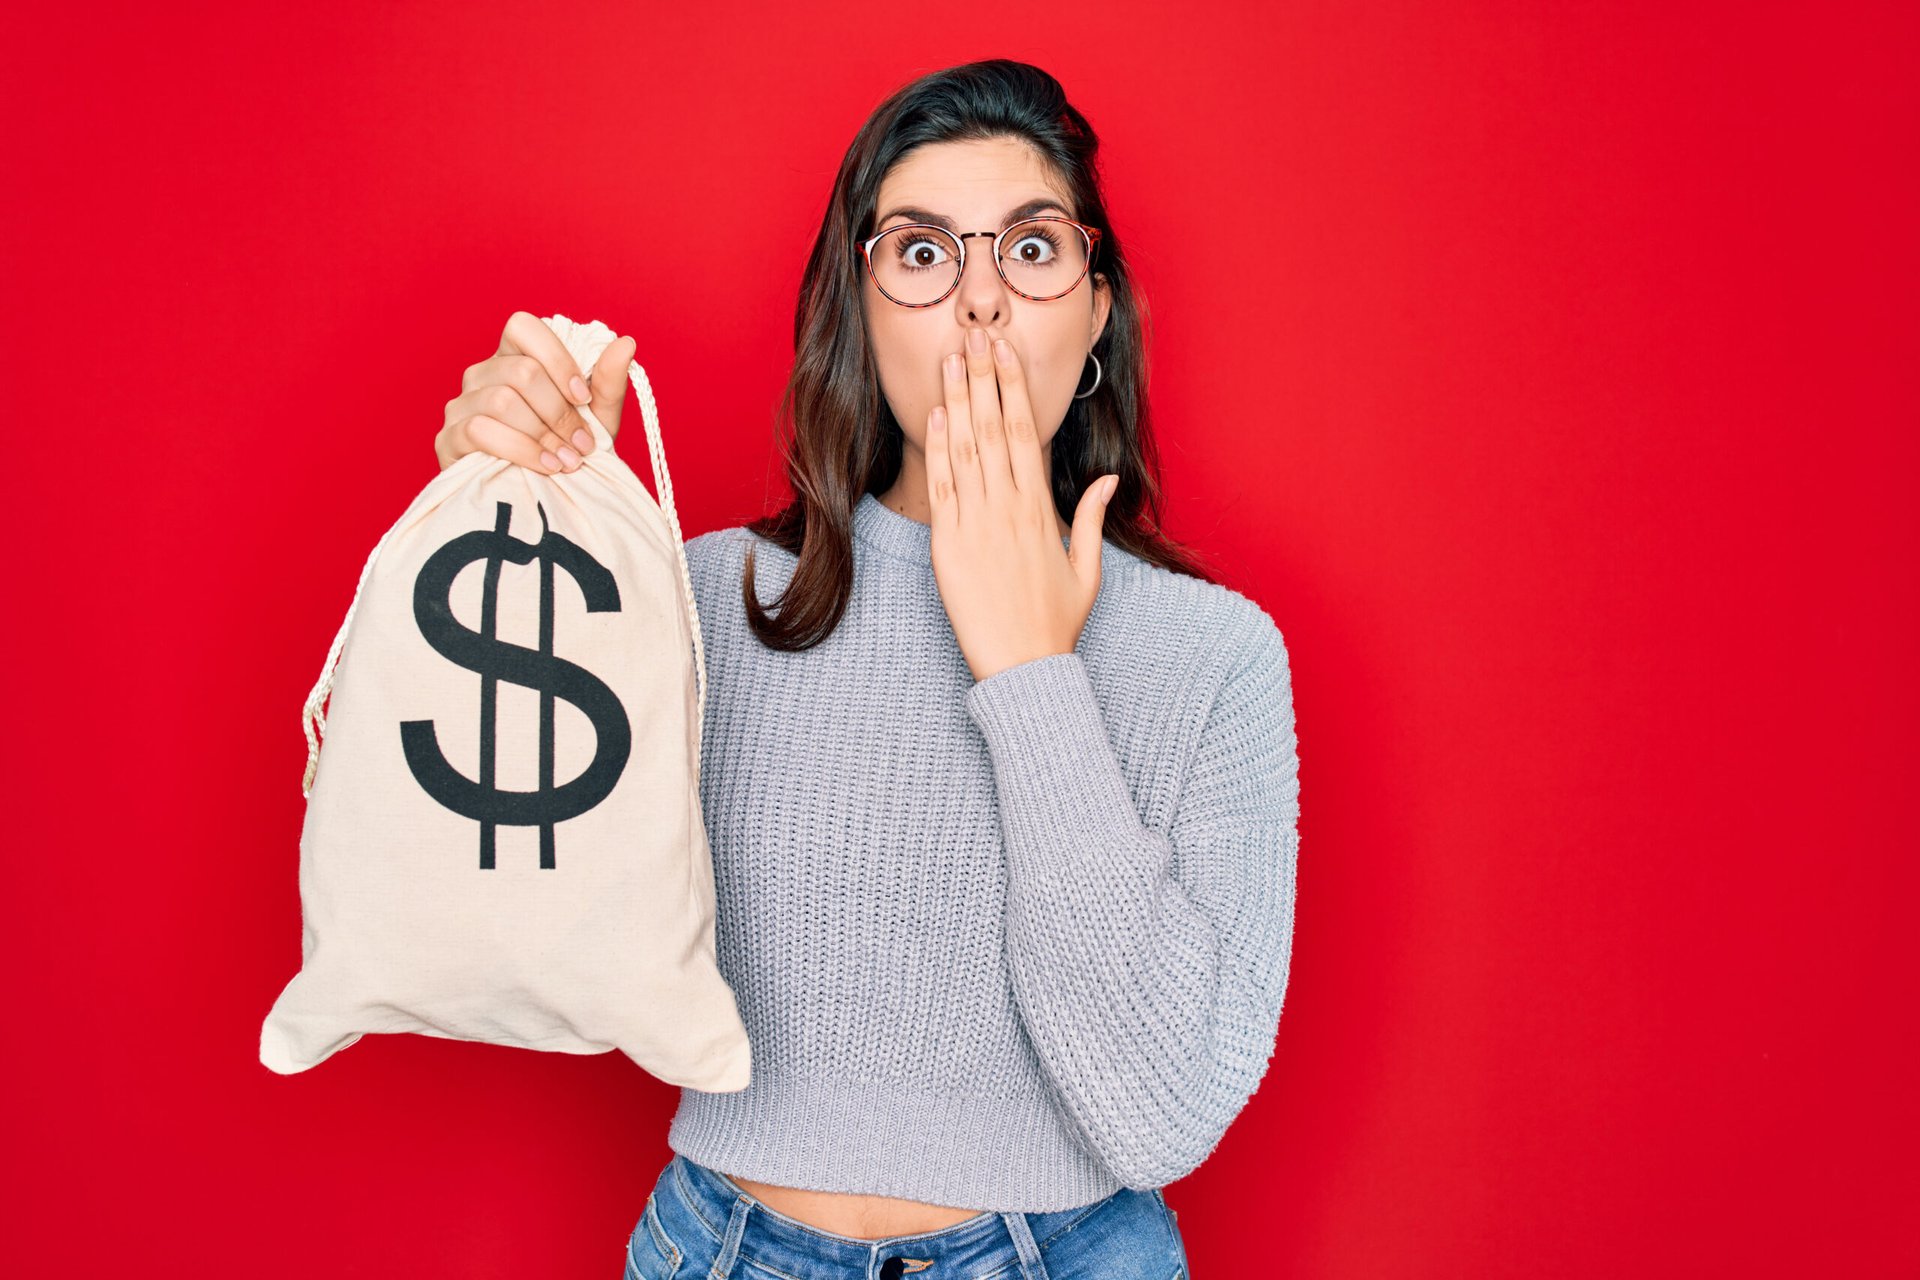 9 Incredibly Expensive Things to Do - How to Blow all Your Money